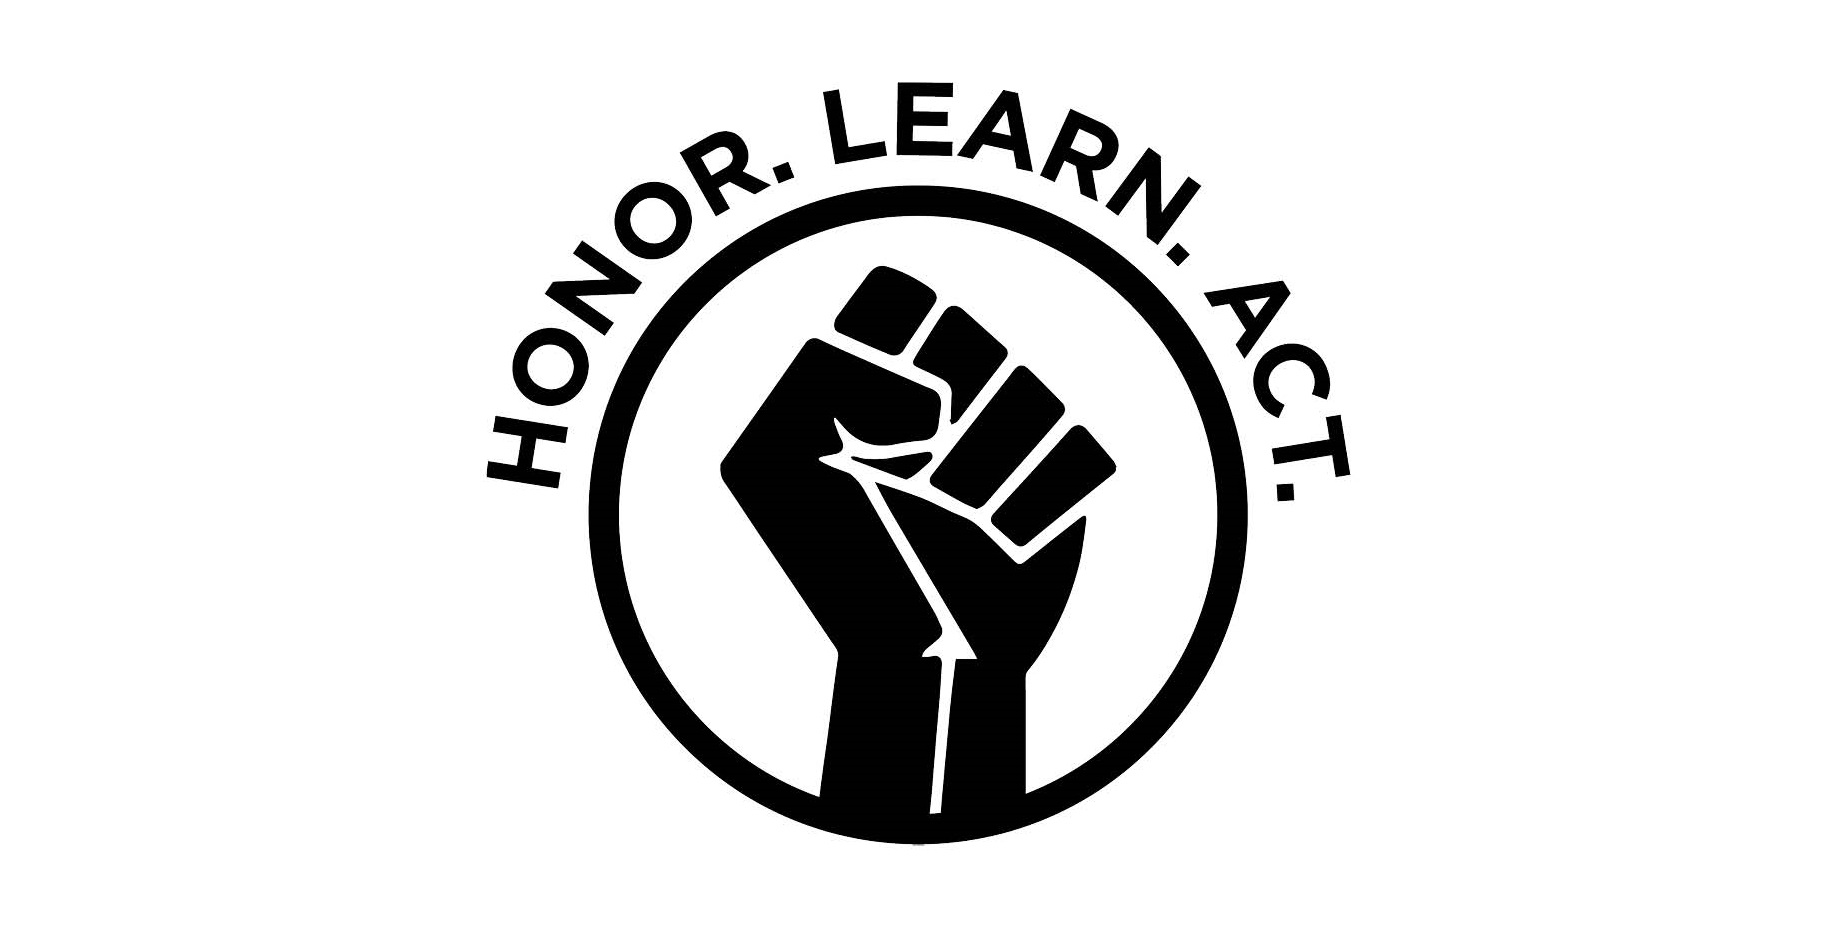 Raised fist with words Honor, Learn, and Act above it